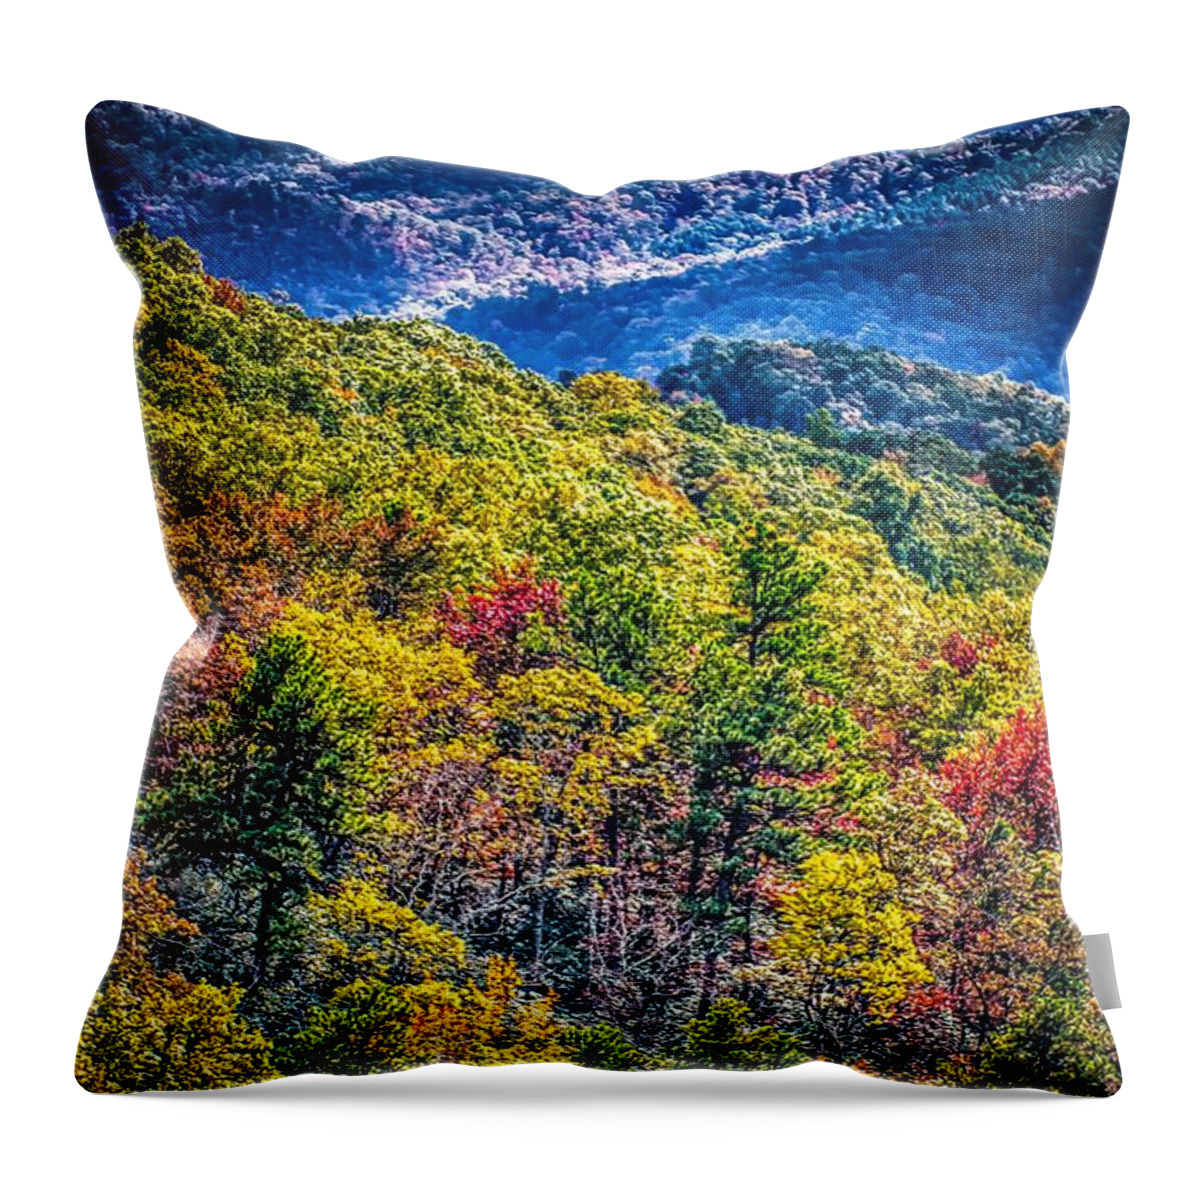 Blue Throw Pillow featuring the photograph Blue Ridge And Smoky Mountains Changing Color In Fall #69 by Alex Grichenko